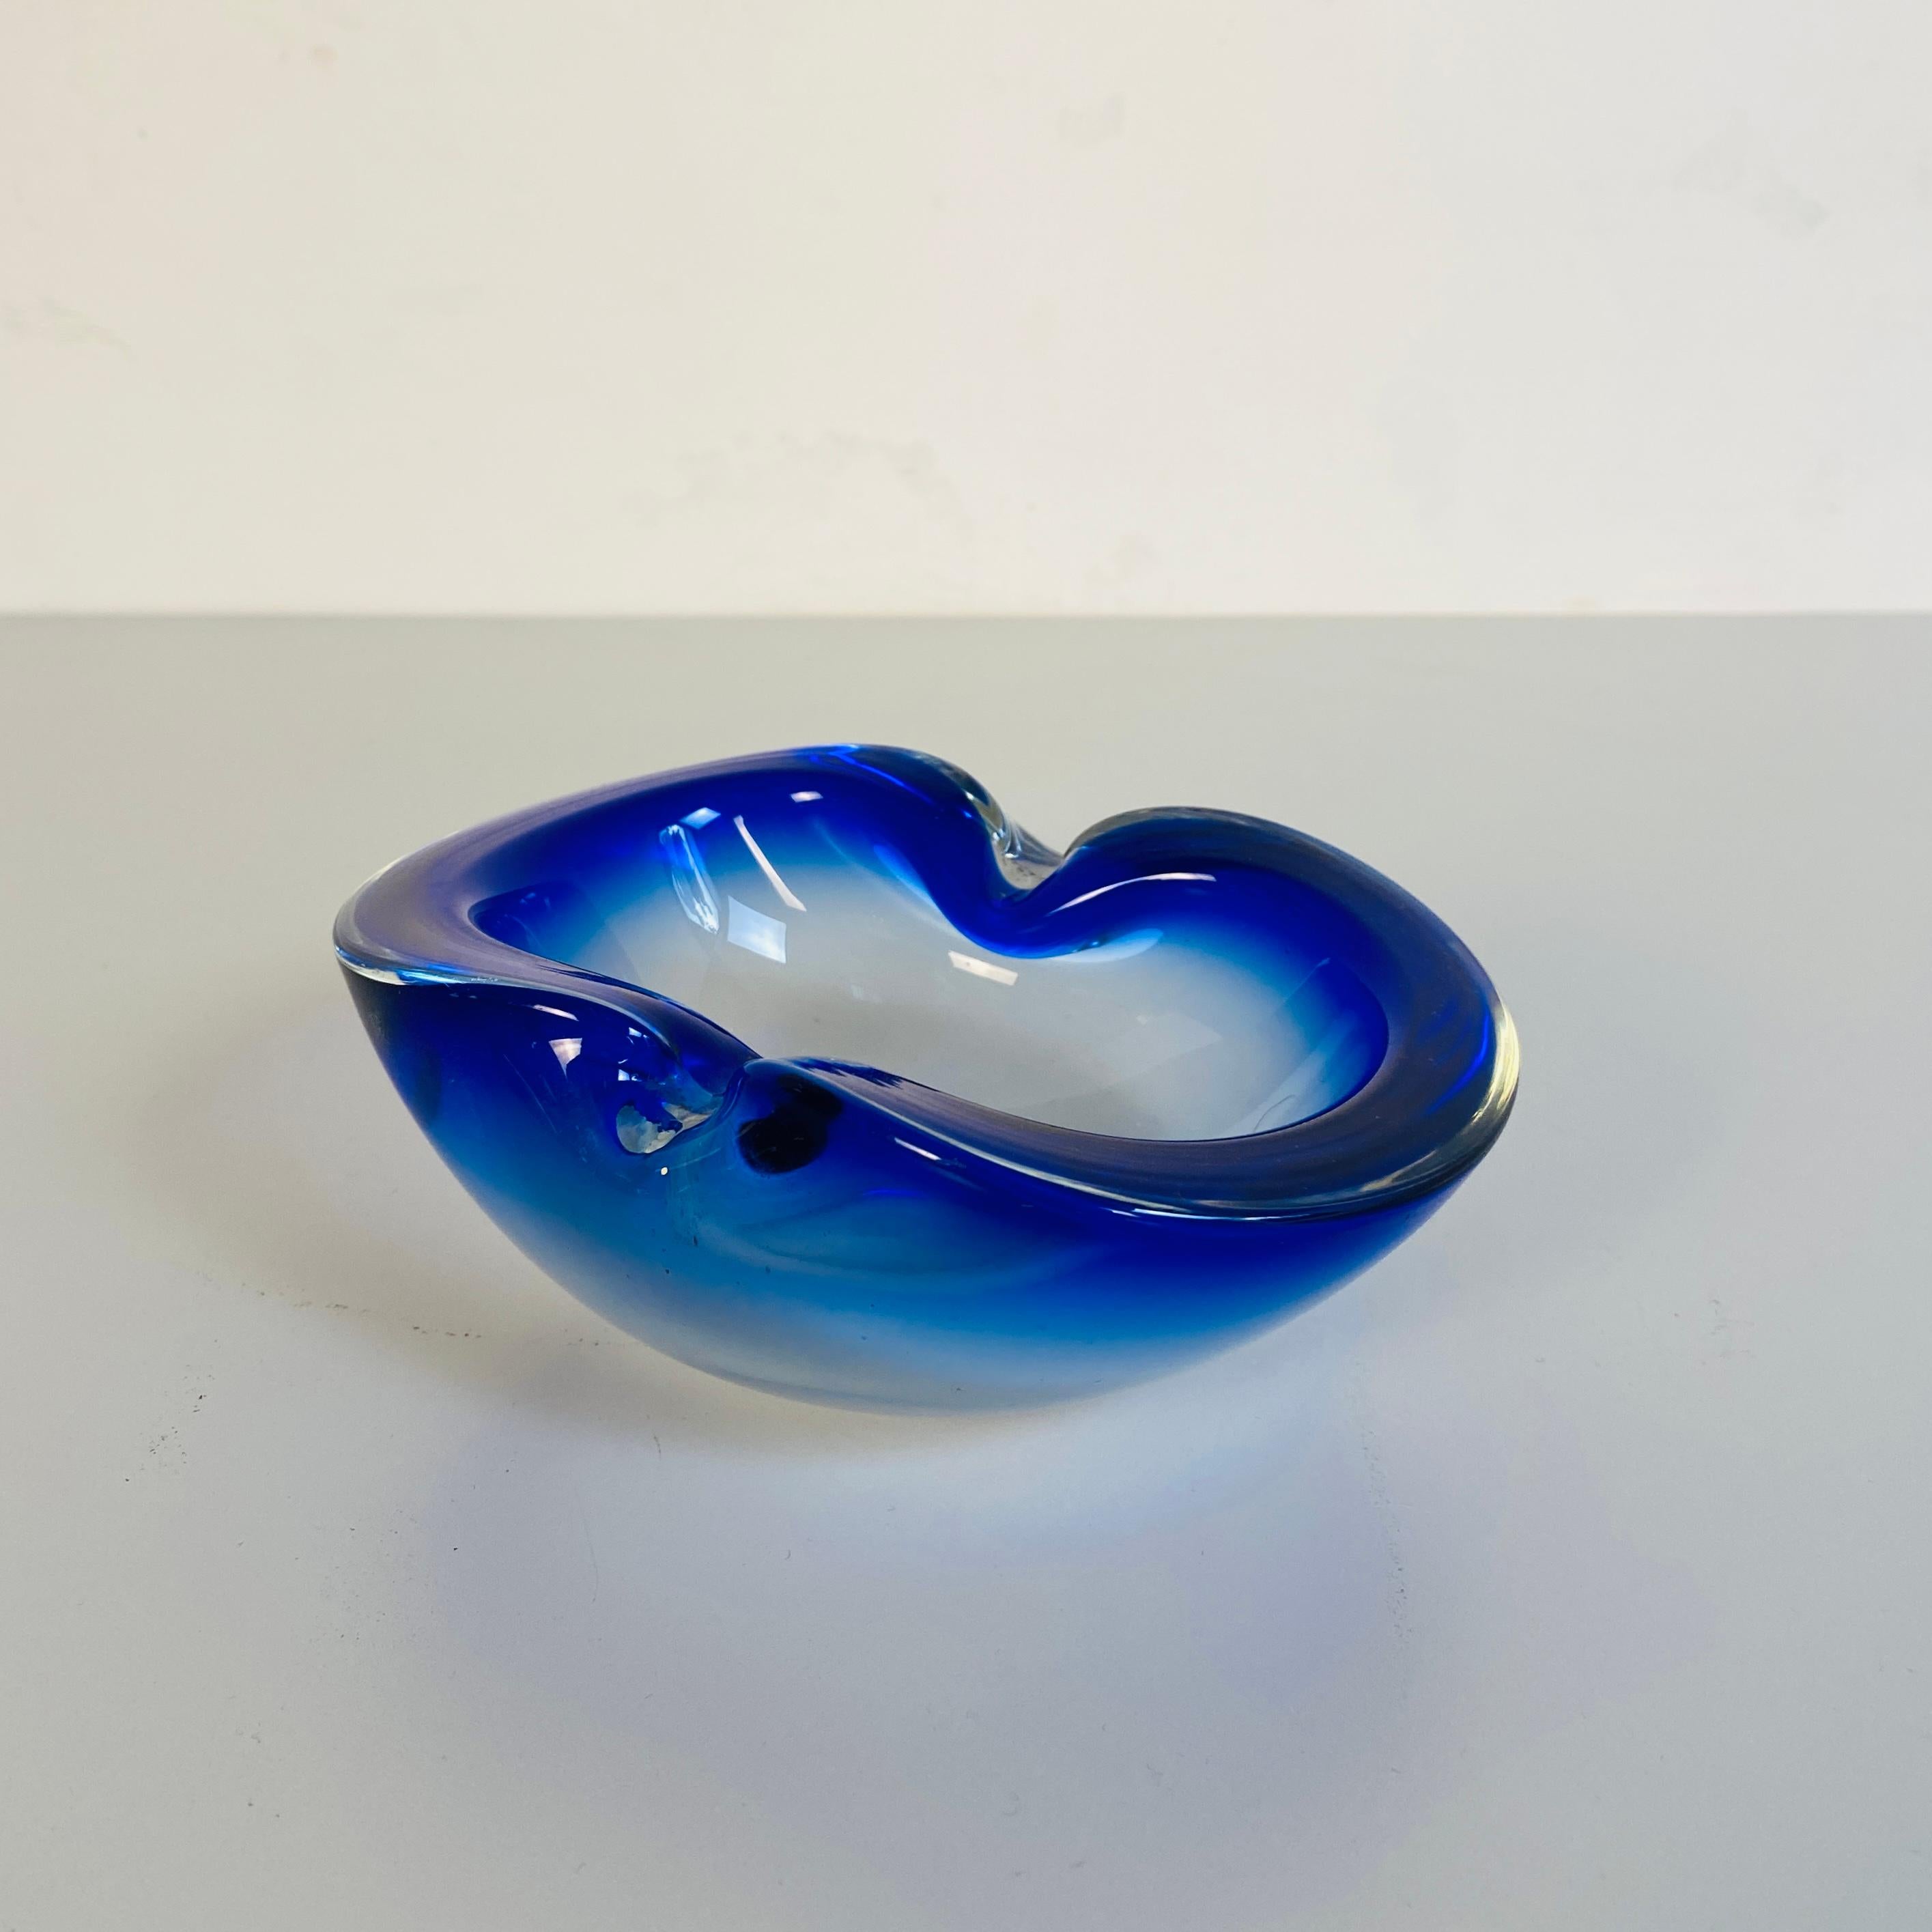 Italian Mid-Century Modern Murano glass oval object holder in blue, 1970s
Oval object holder in Murano glass, polychrome, transparent at the base and blue on the edges.

It is in very good condition.

This Fantastic series of Murano glass vase and